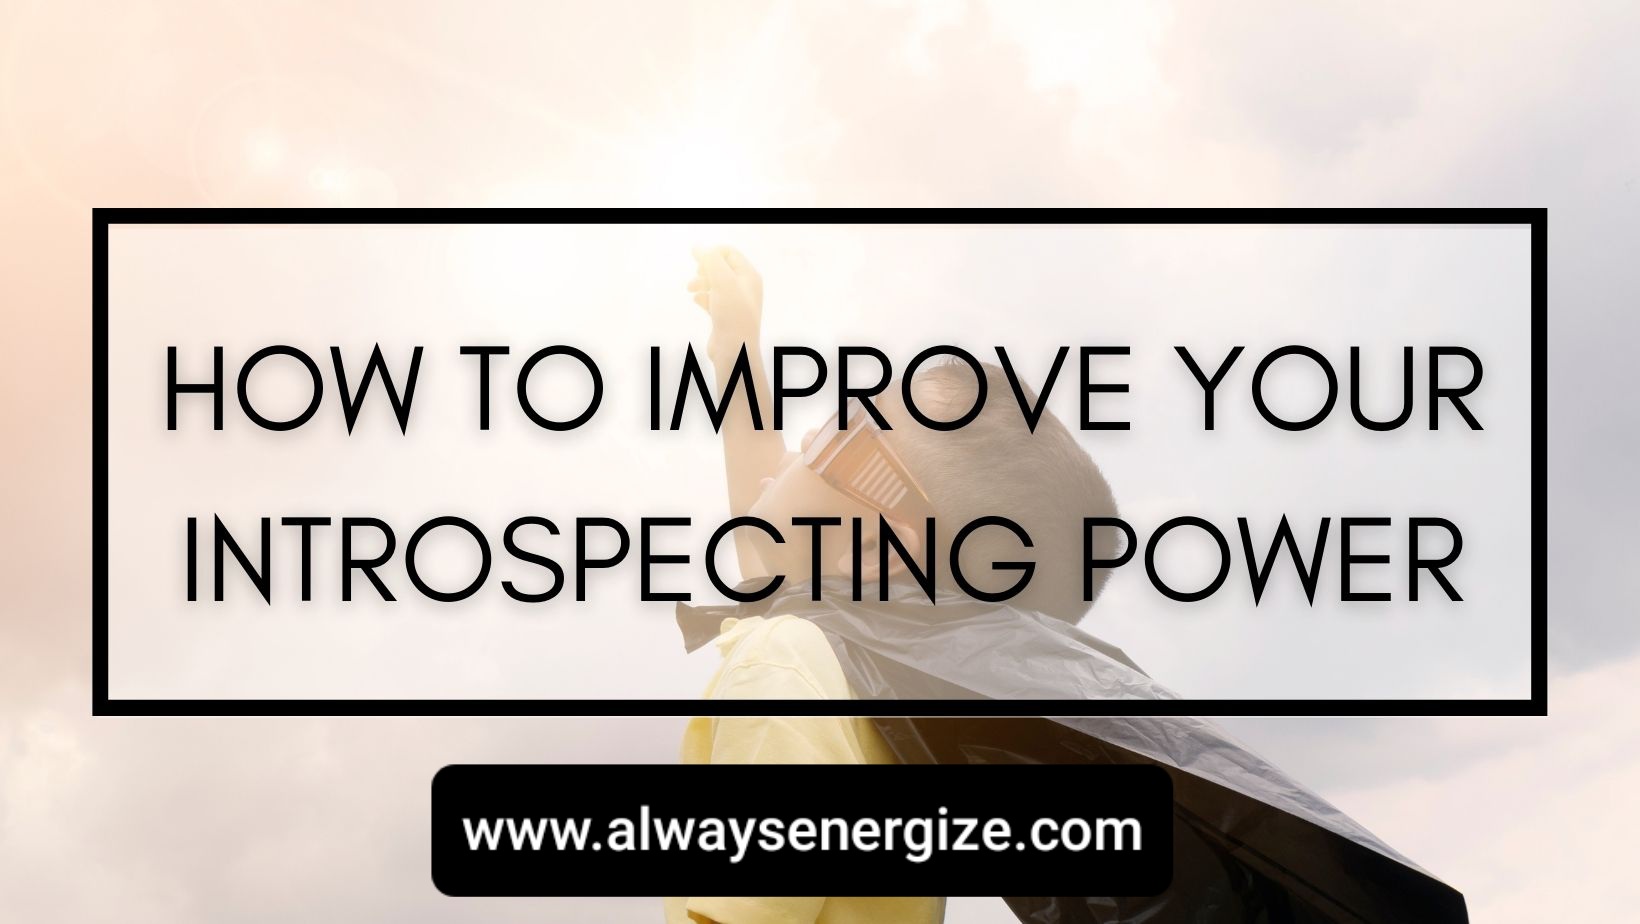 How To Improve Your Introspecting Power